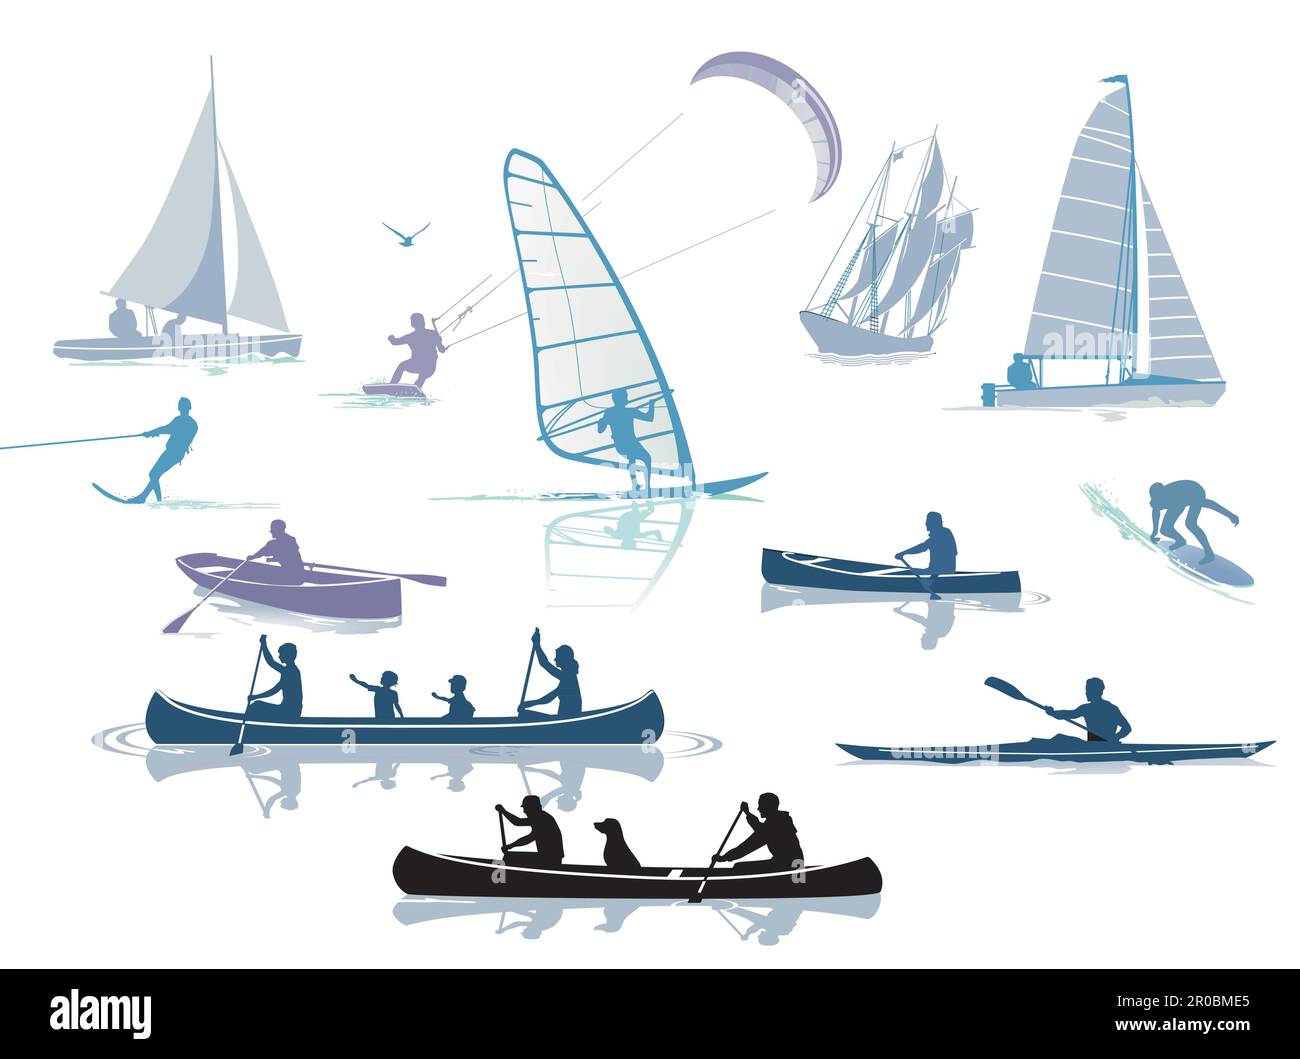 Water sports at leisure, illustration Stock Vector